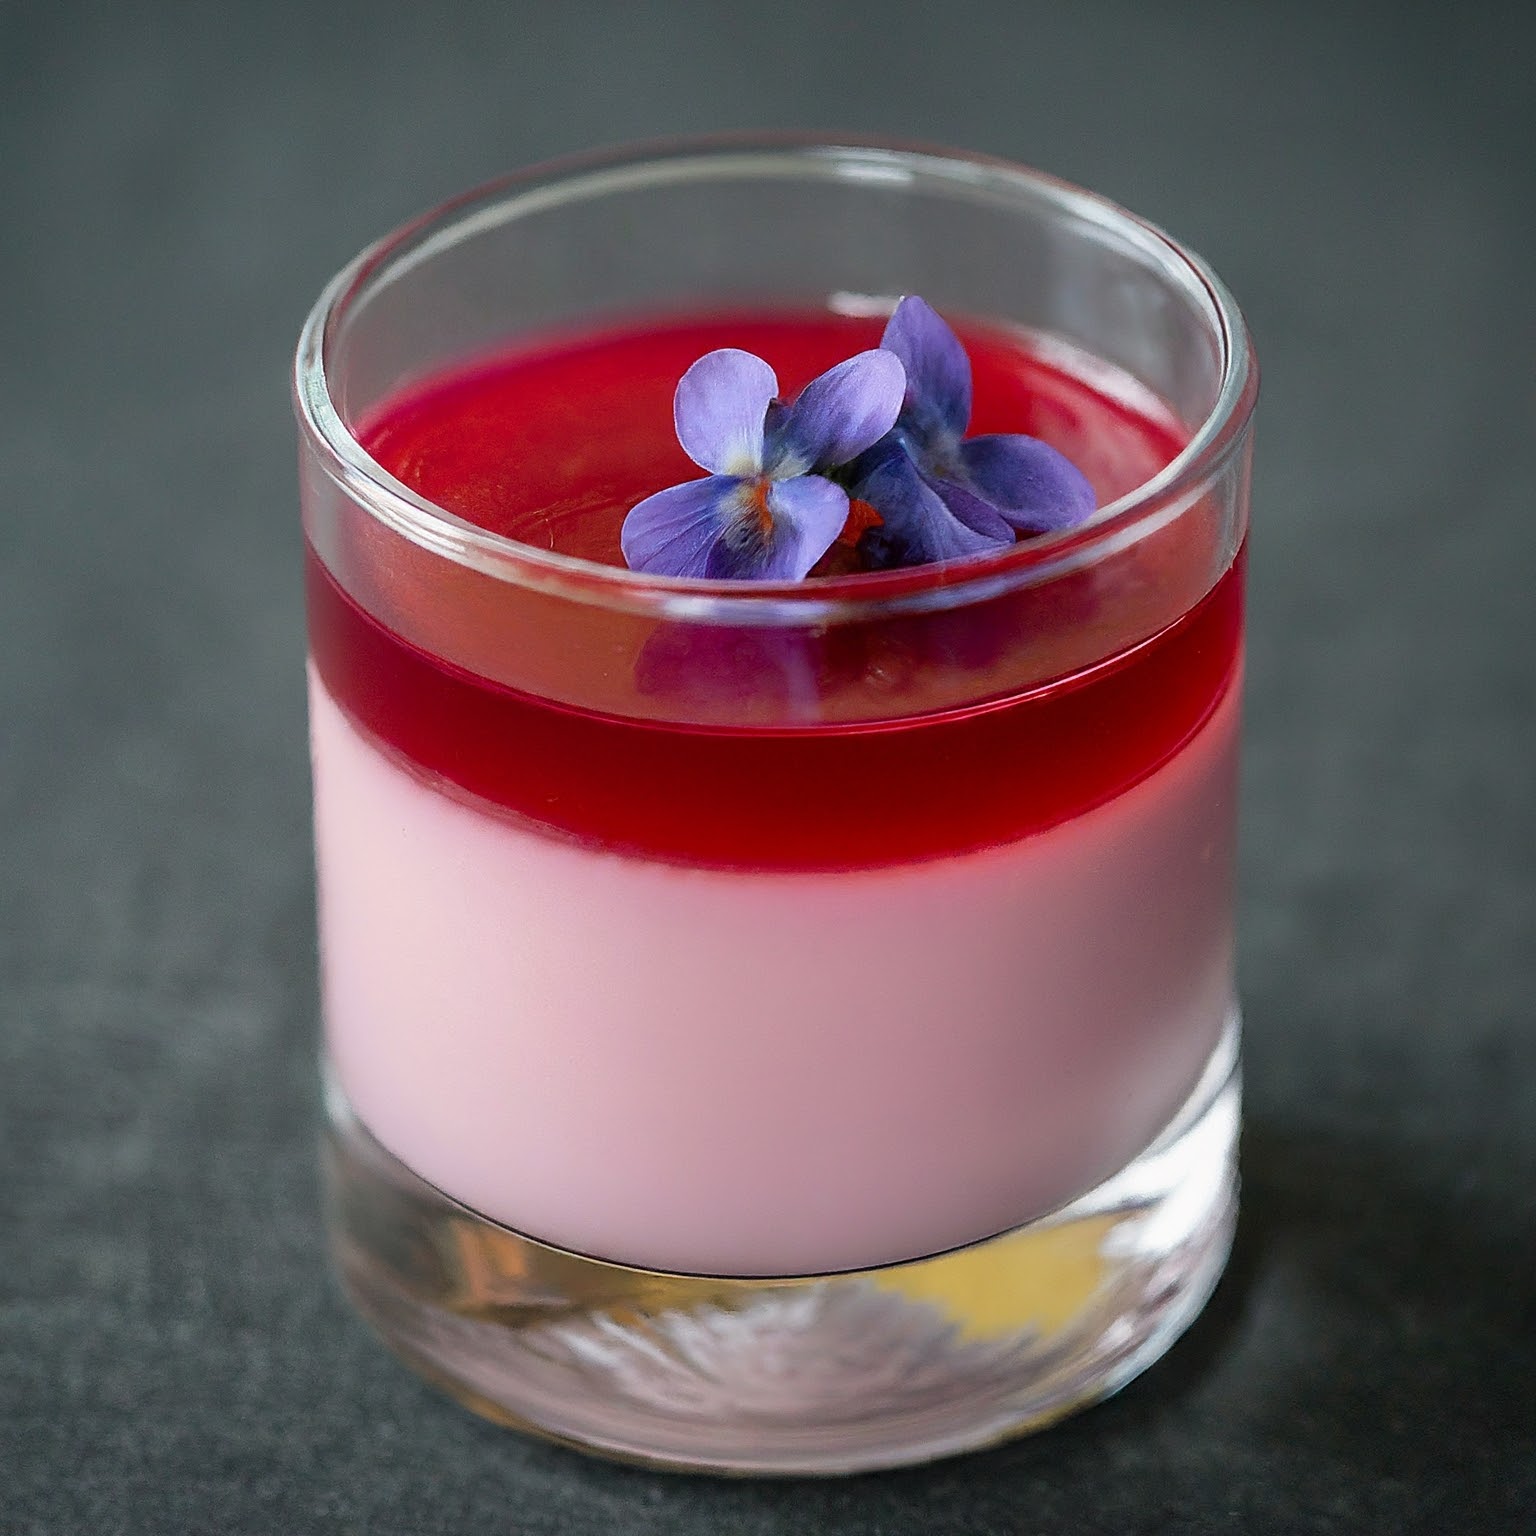 Hibiscus Rosewater Panna Cotta with Candied Violets.jpeg